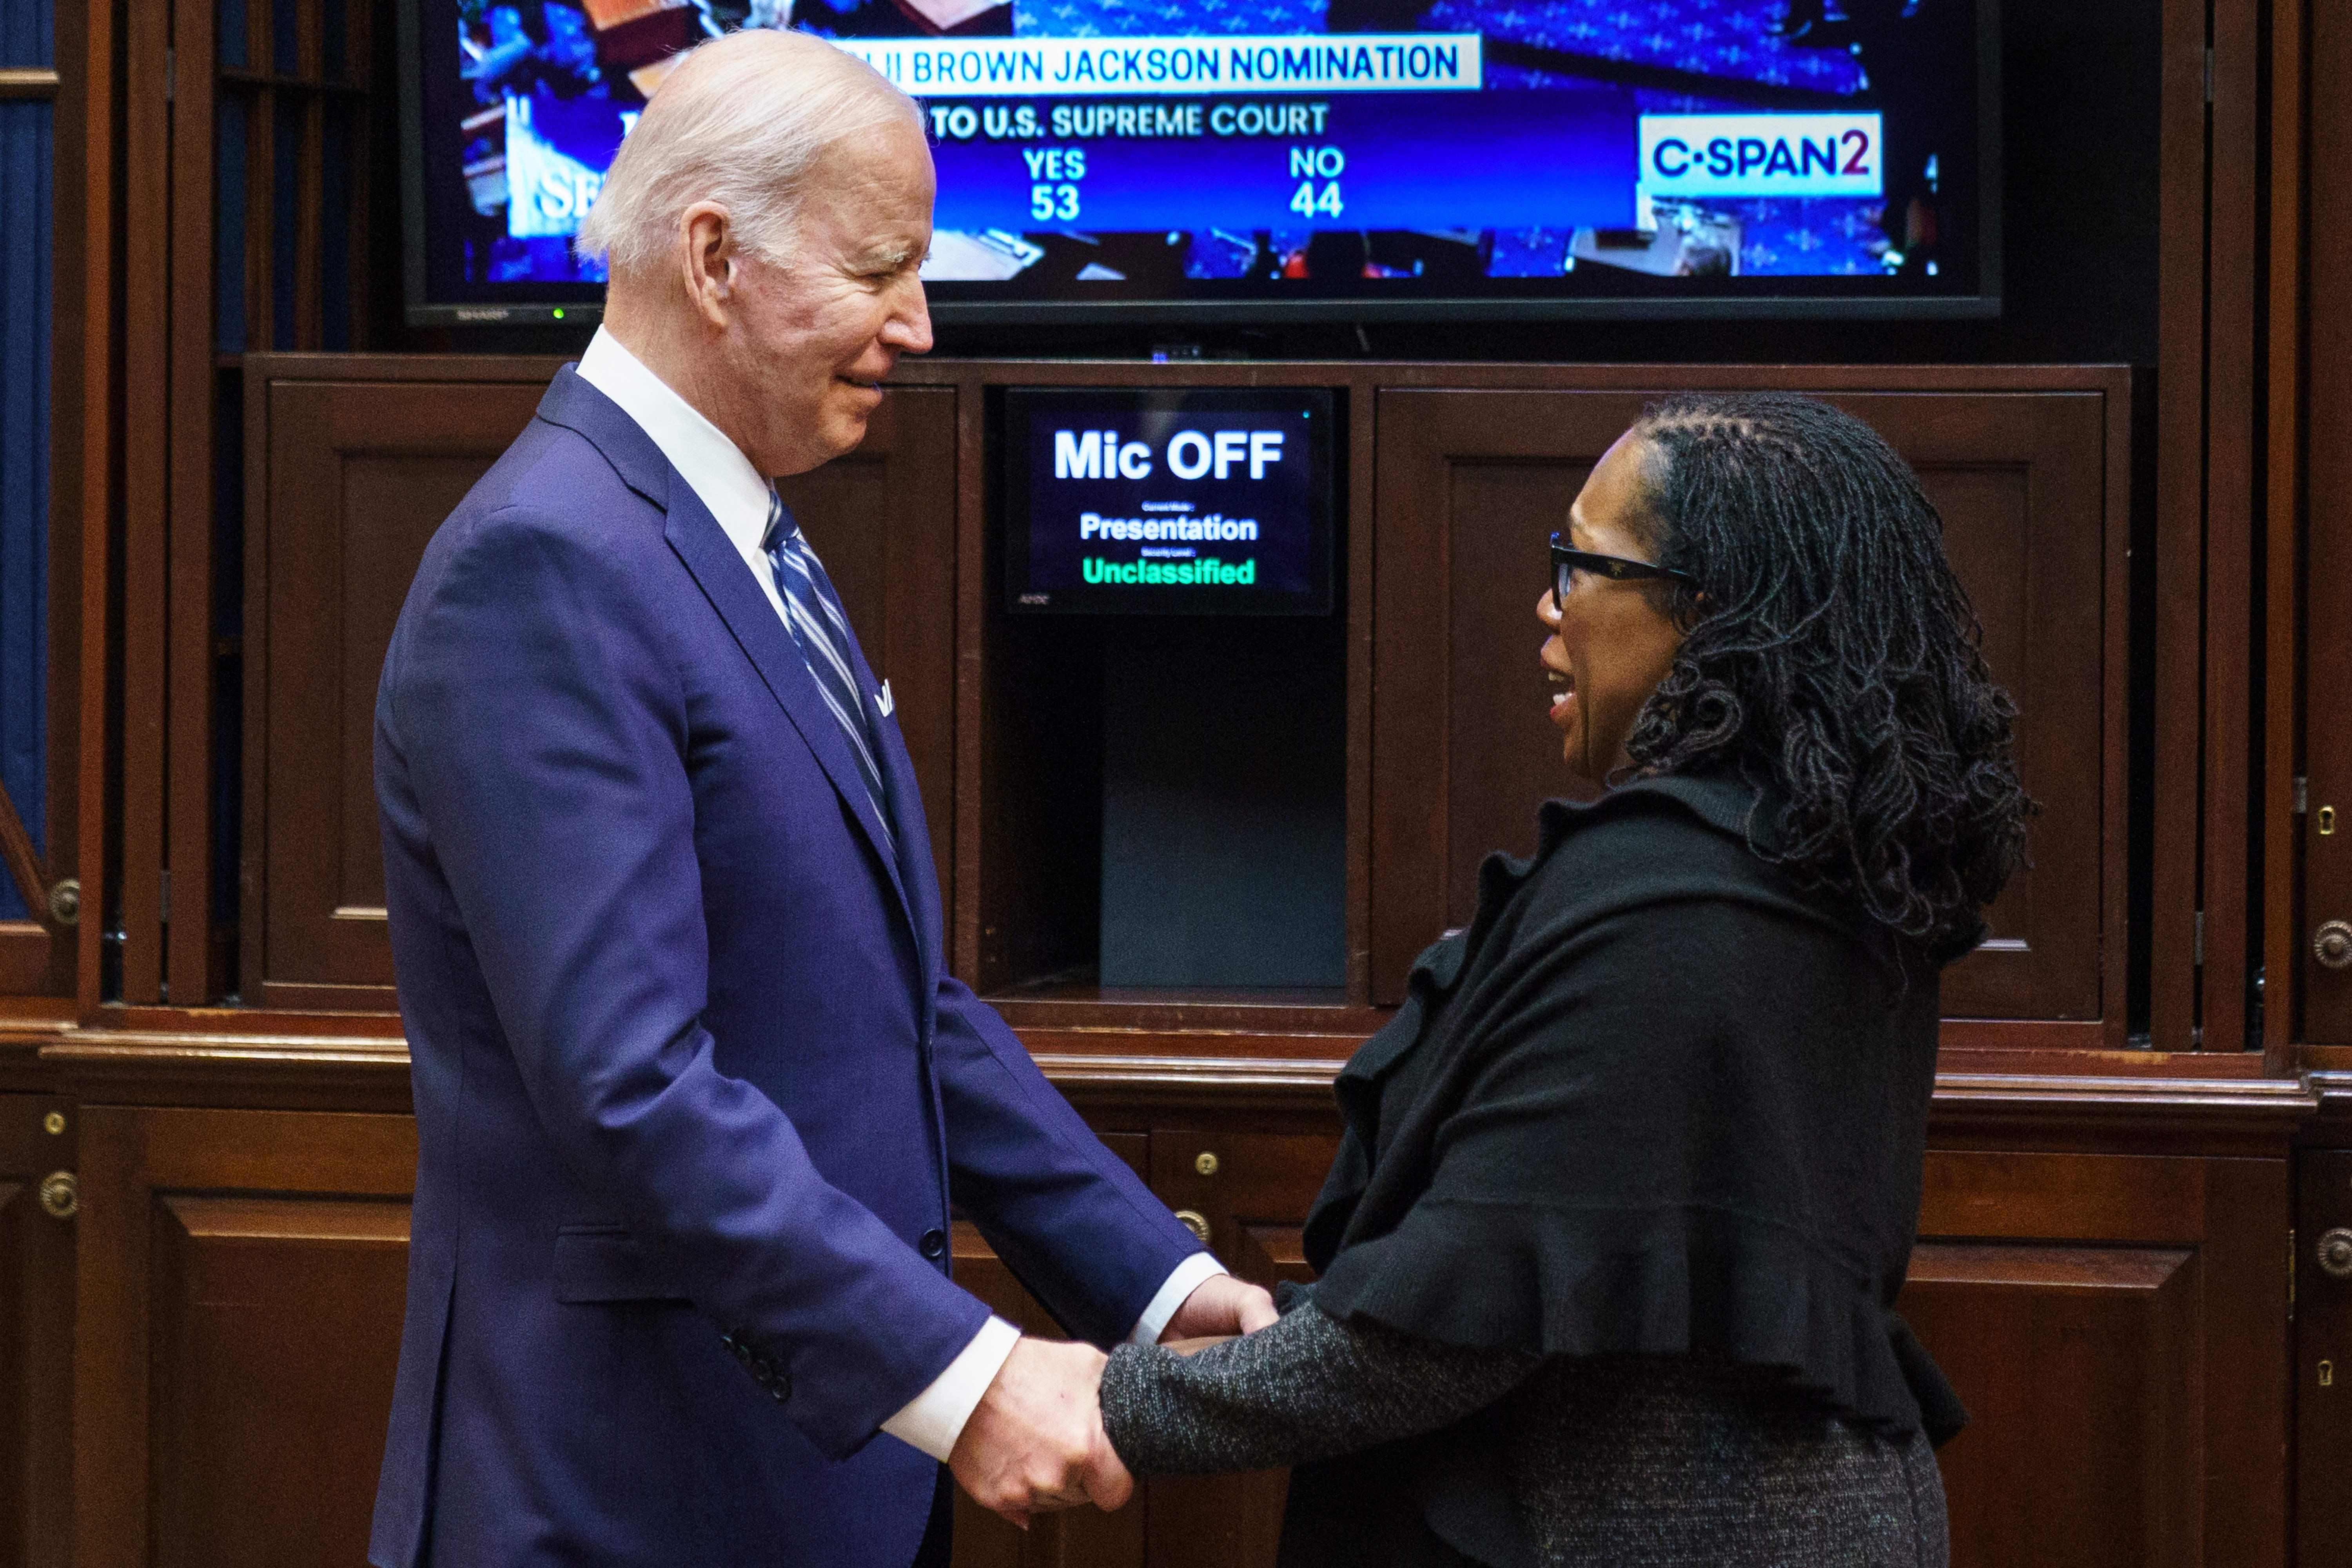 Biden and Jackson clasp hands in front of a screen showing the Senate floor and the vote